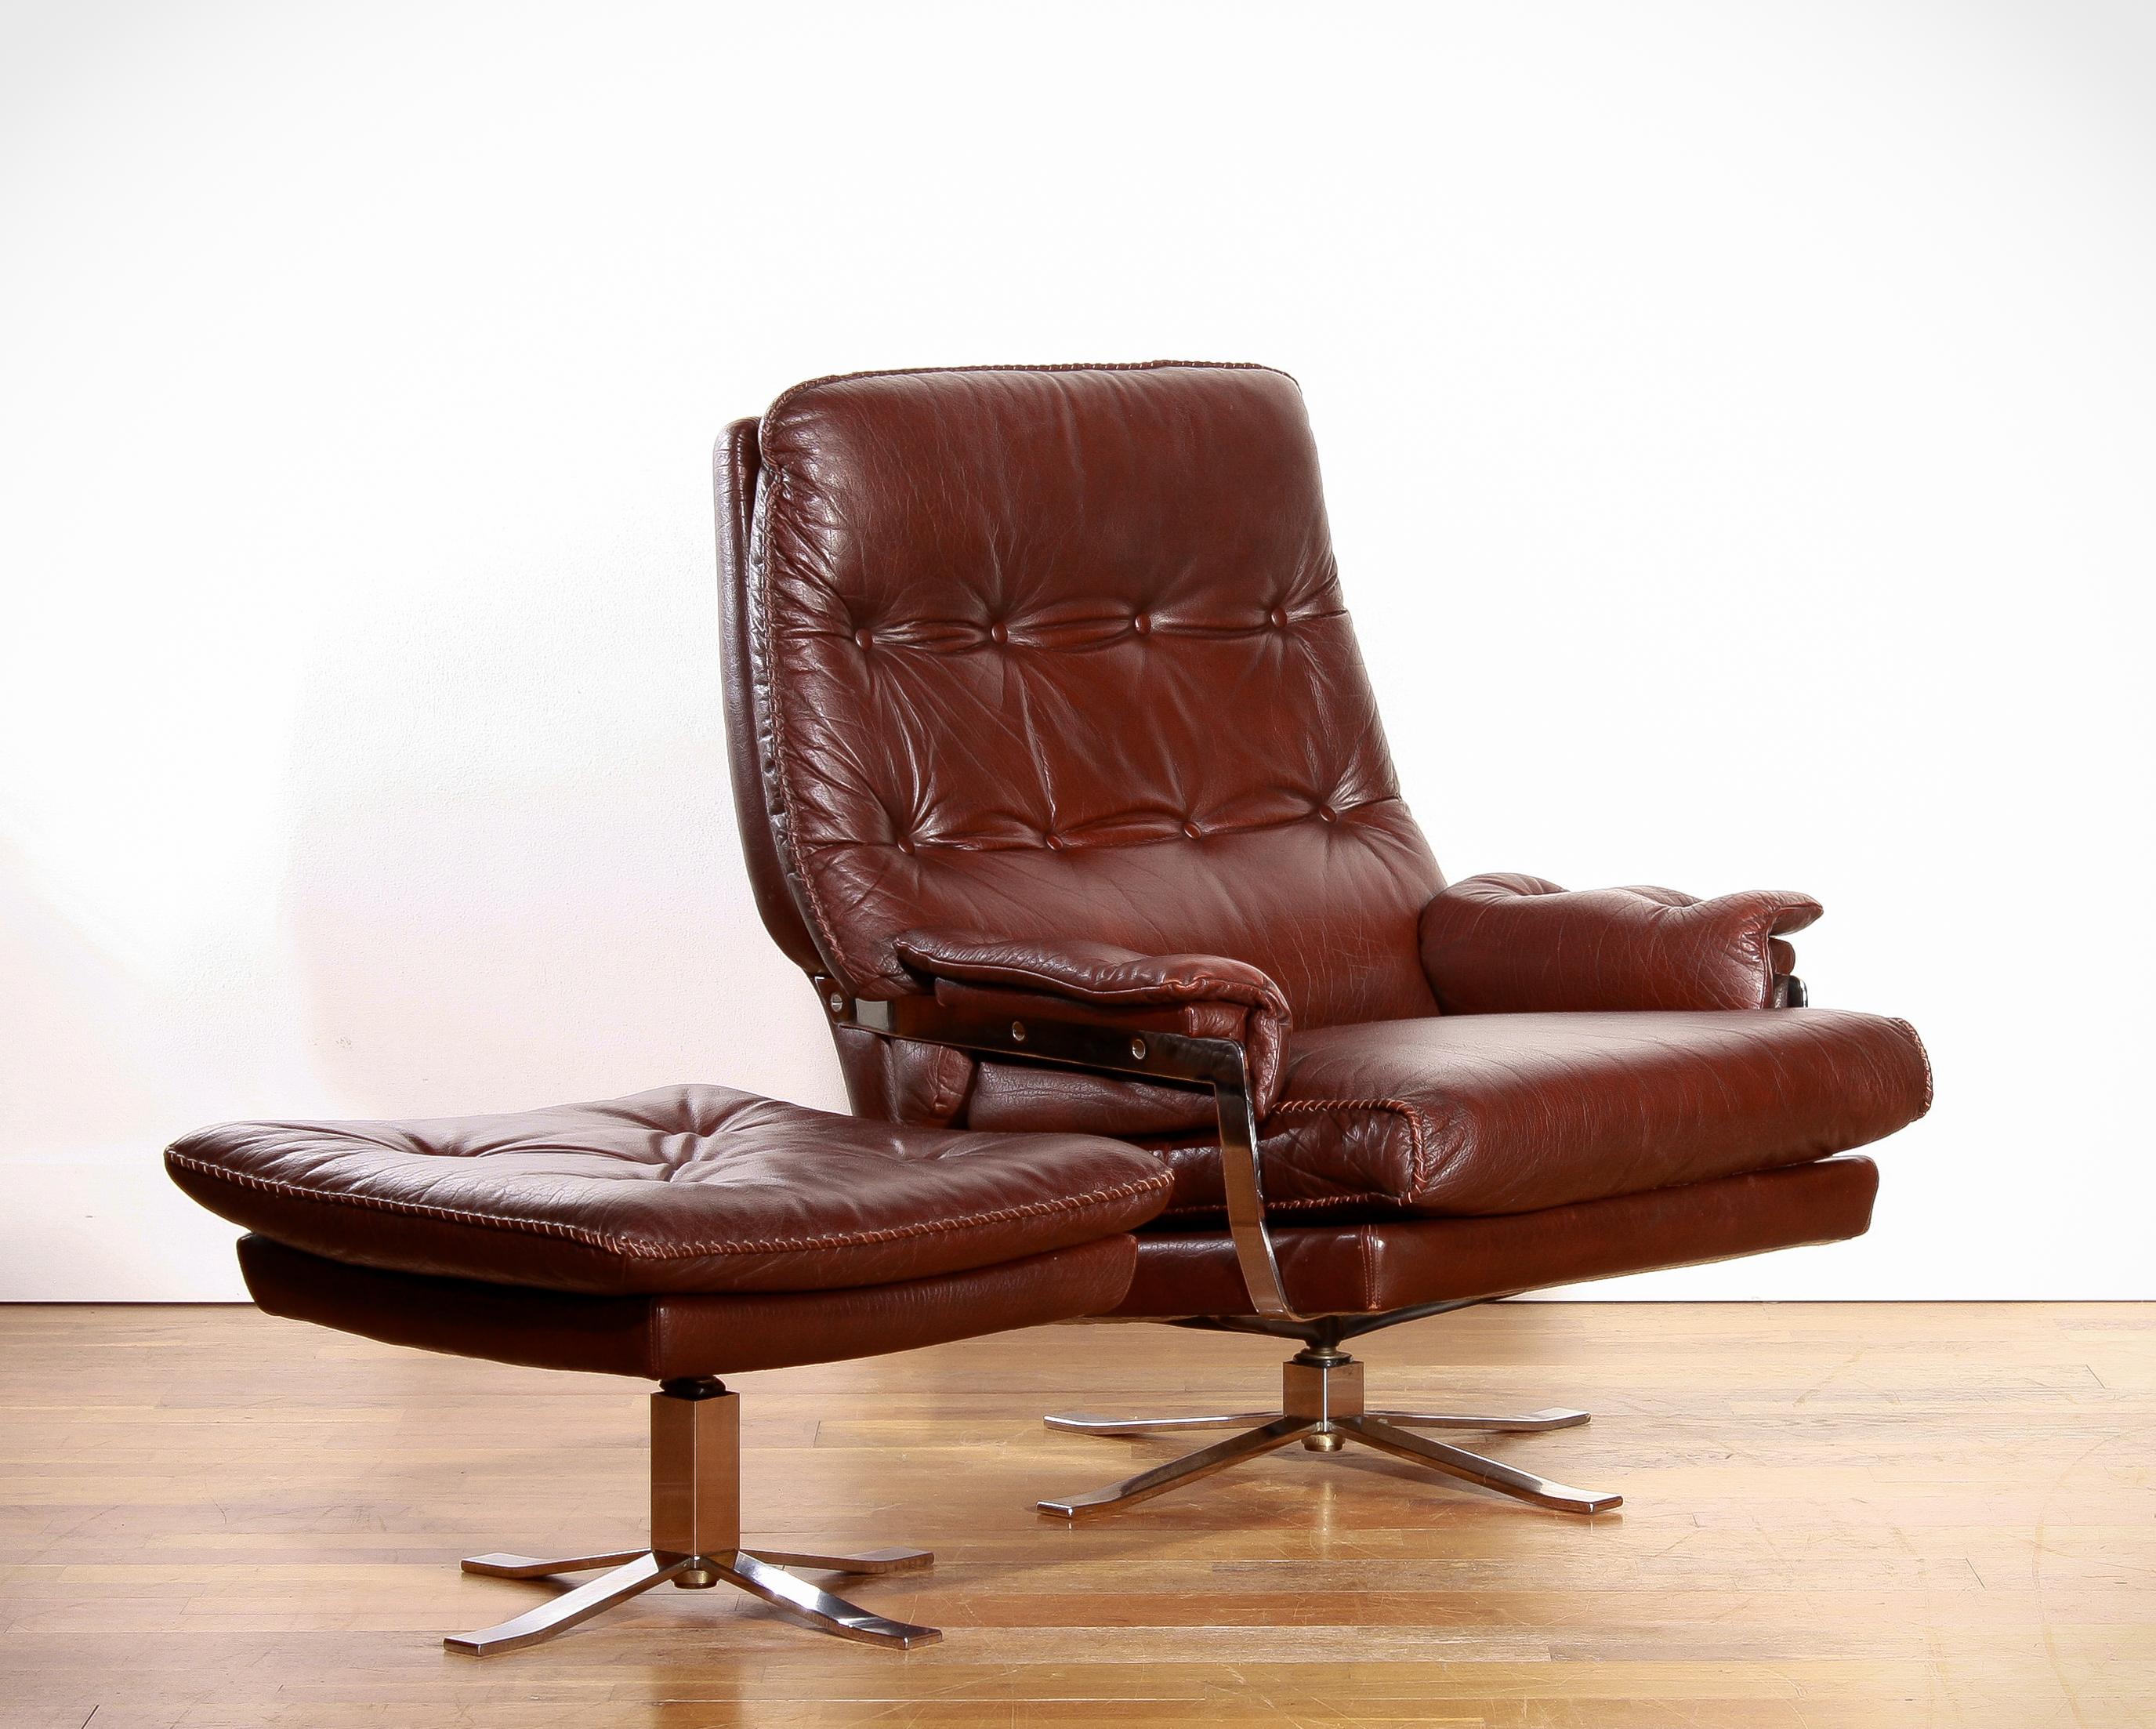 Chrome Arne Norell, Lounge Swivel Chair and Ottoman, Hand-Stitched, Leather In Good Condition In Silvolde, Gelderland